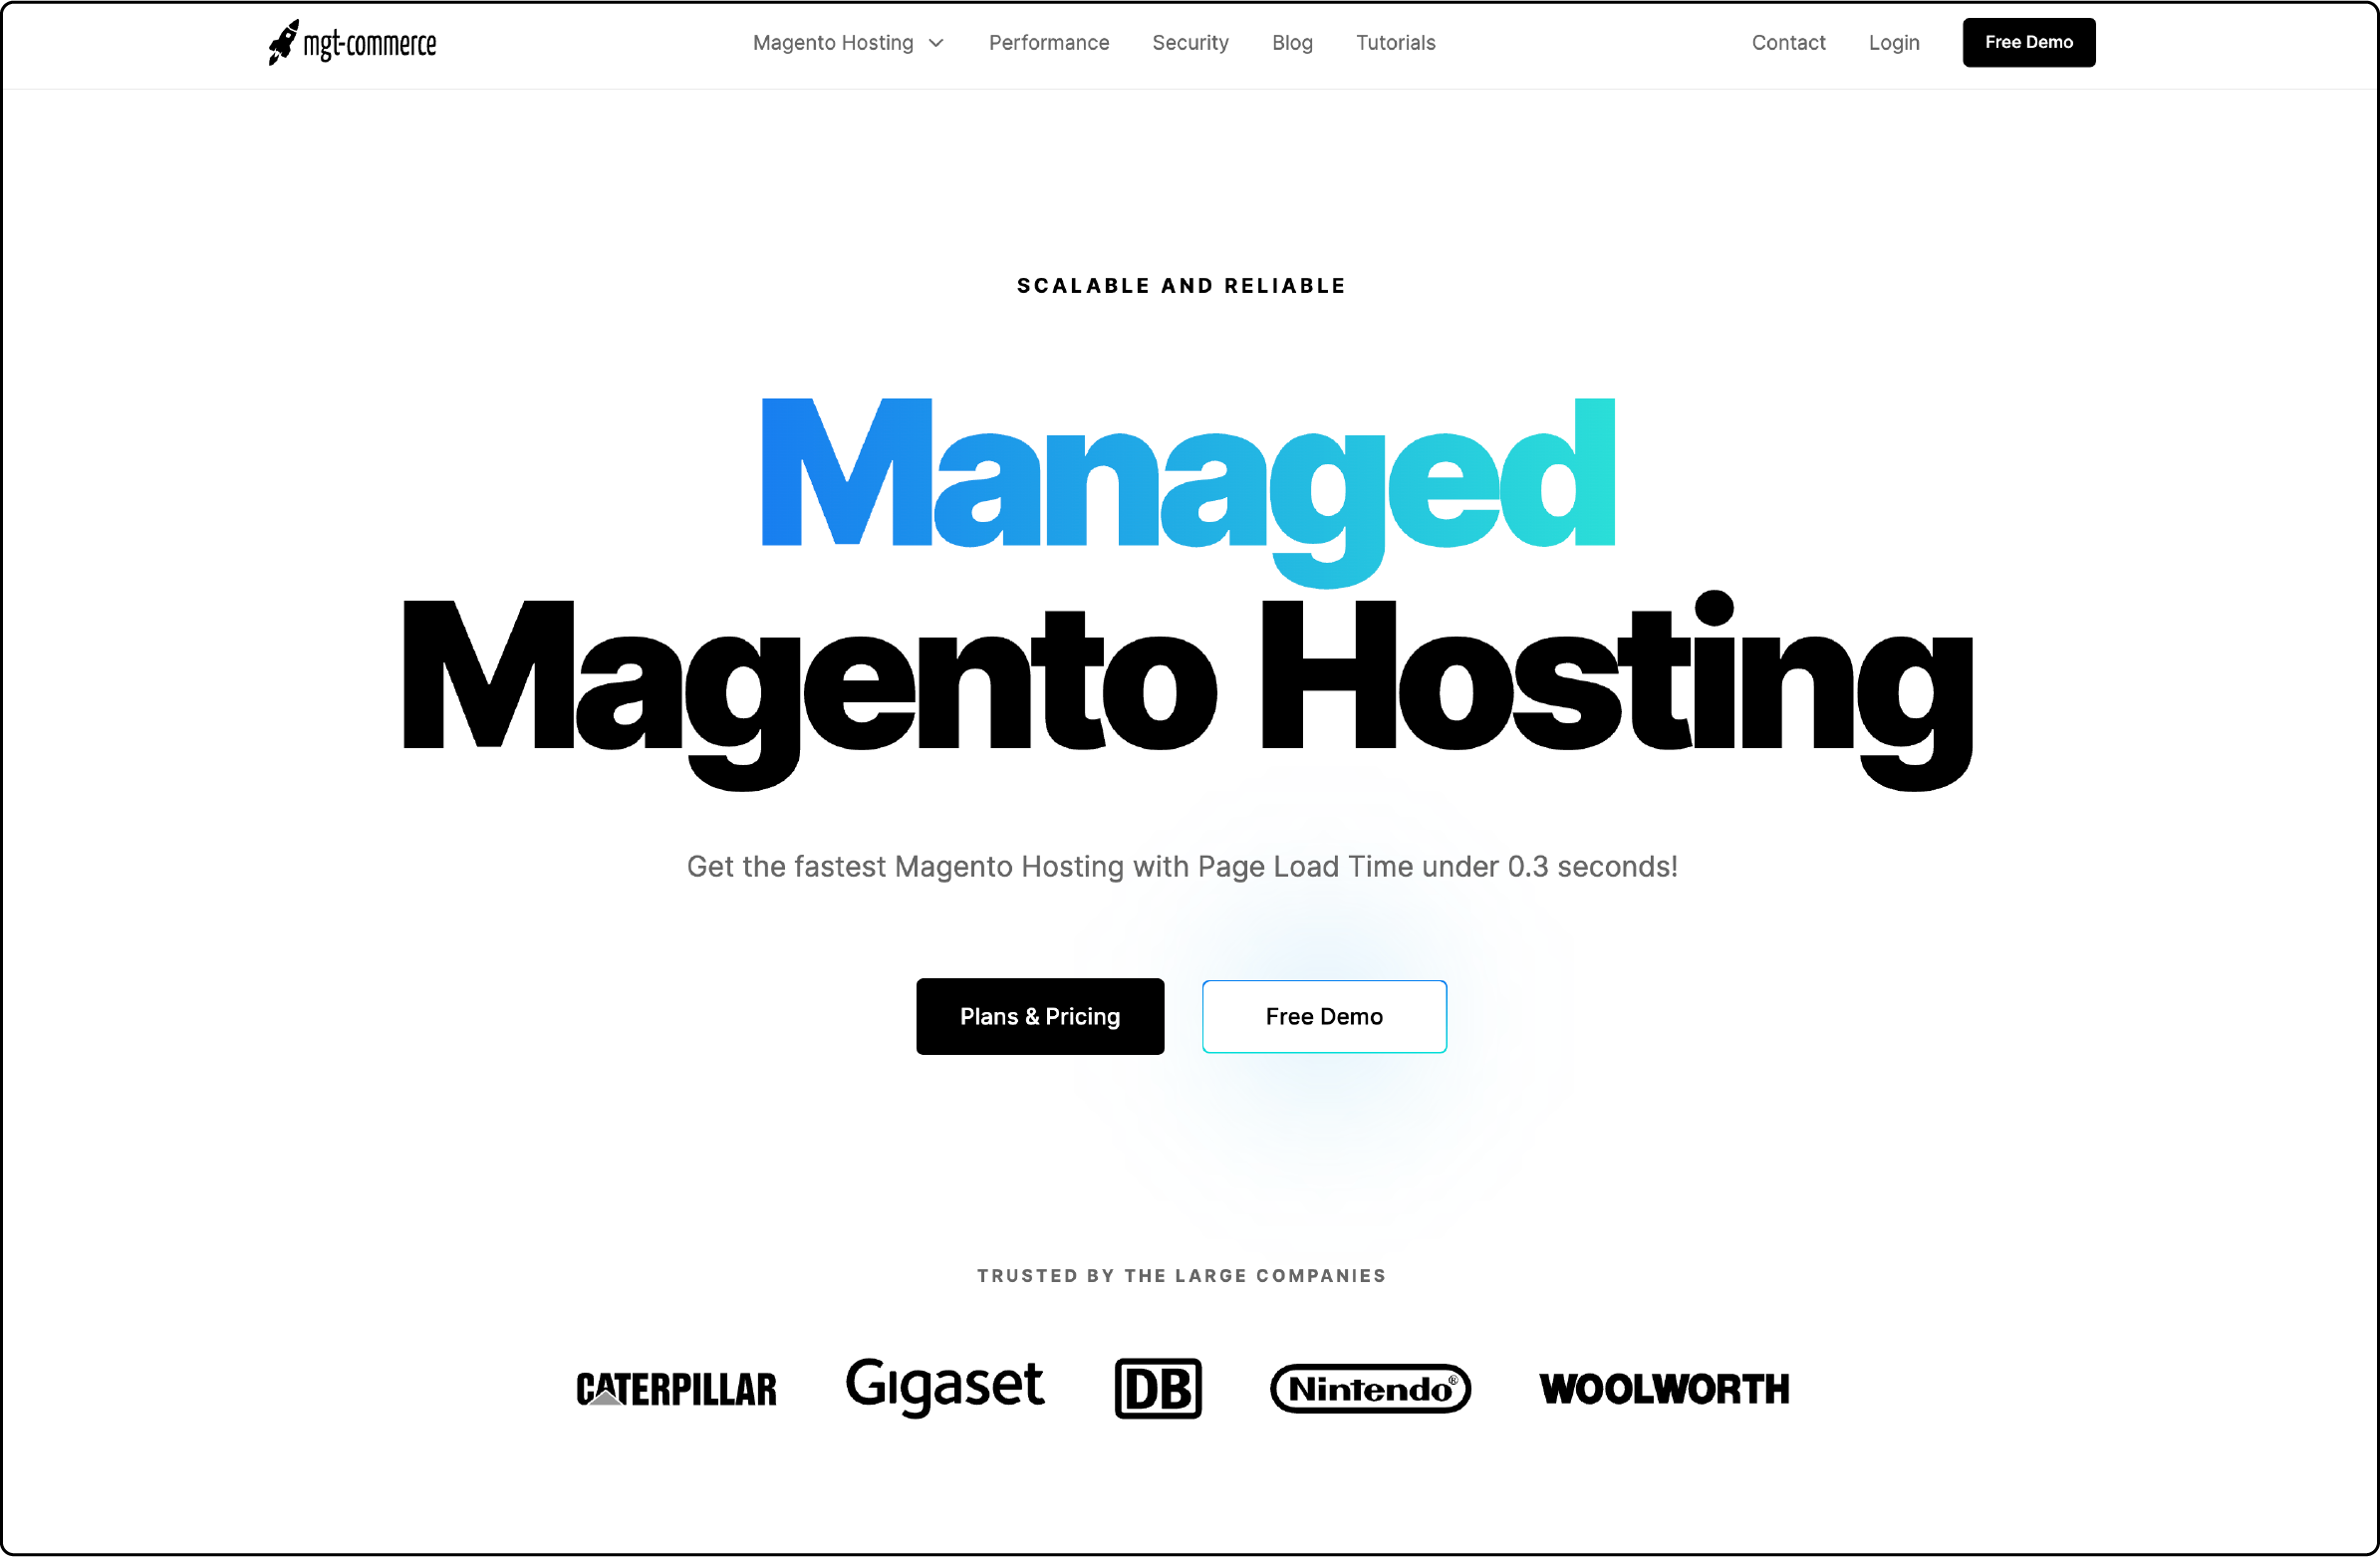 MGT-Commerce homepage showcasing Magento hosting services